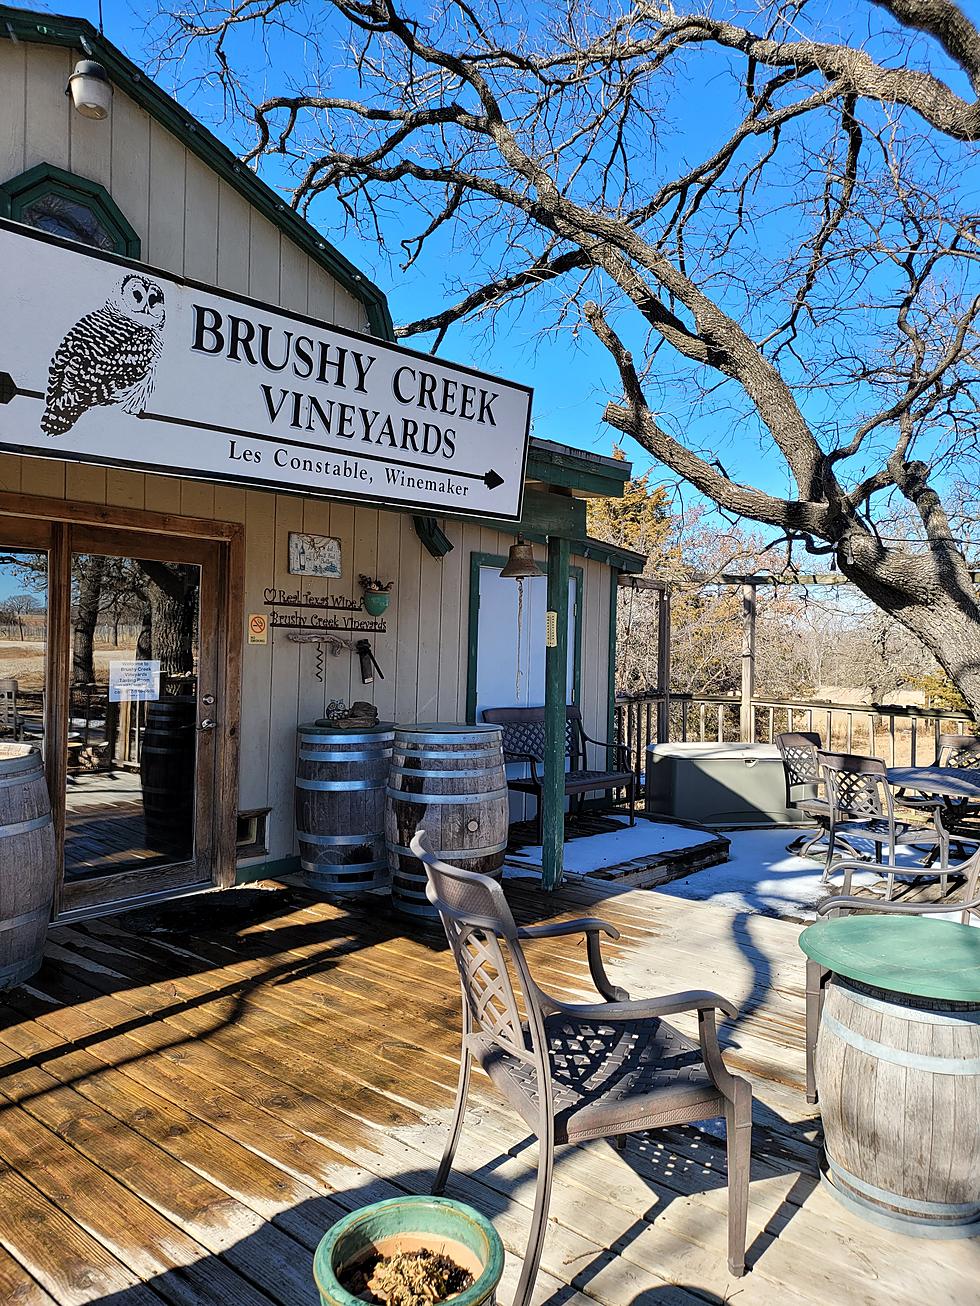 Have You Been to this Hidden Gem of a Winery Just Outside of Wichita Falls?